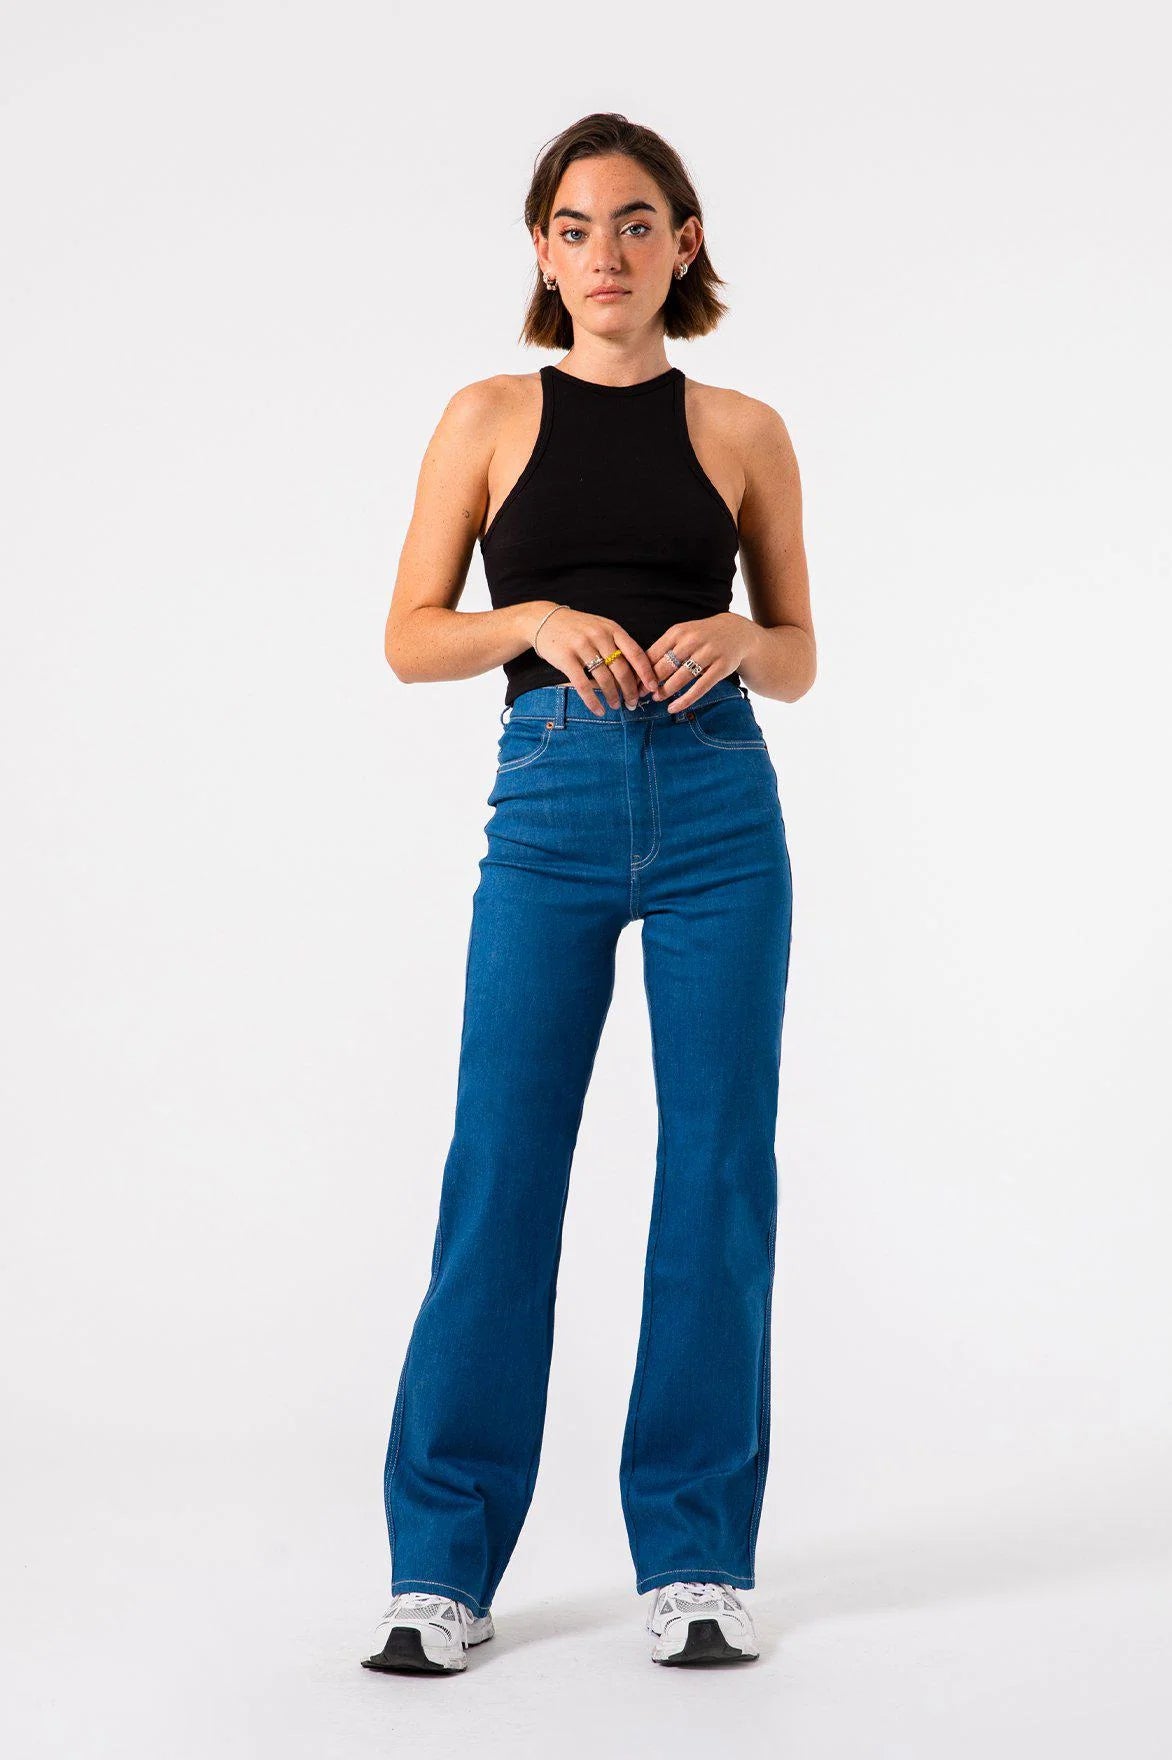 Load image into Gallery viewer, Dr. Denim Moxy Straight Jeans - Less Blue Rinse
